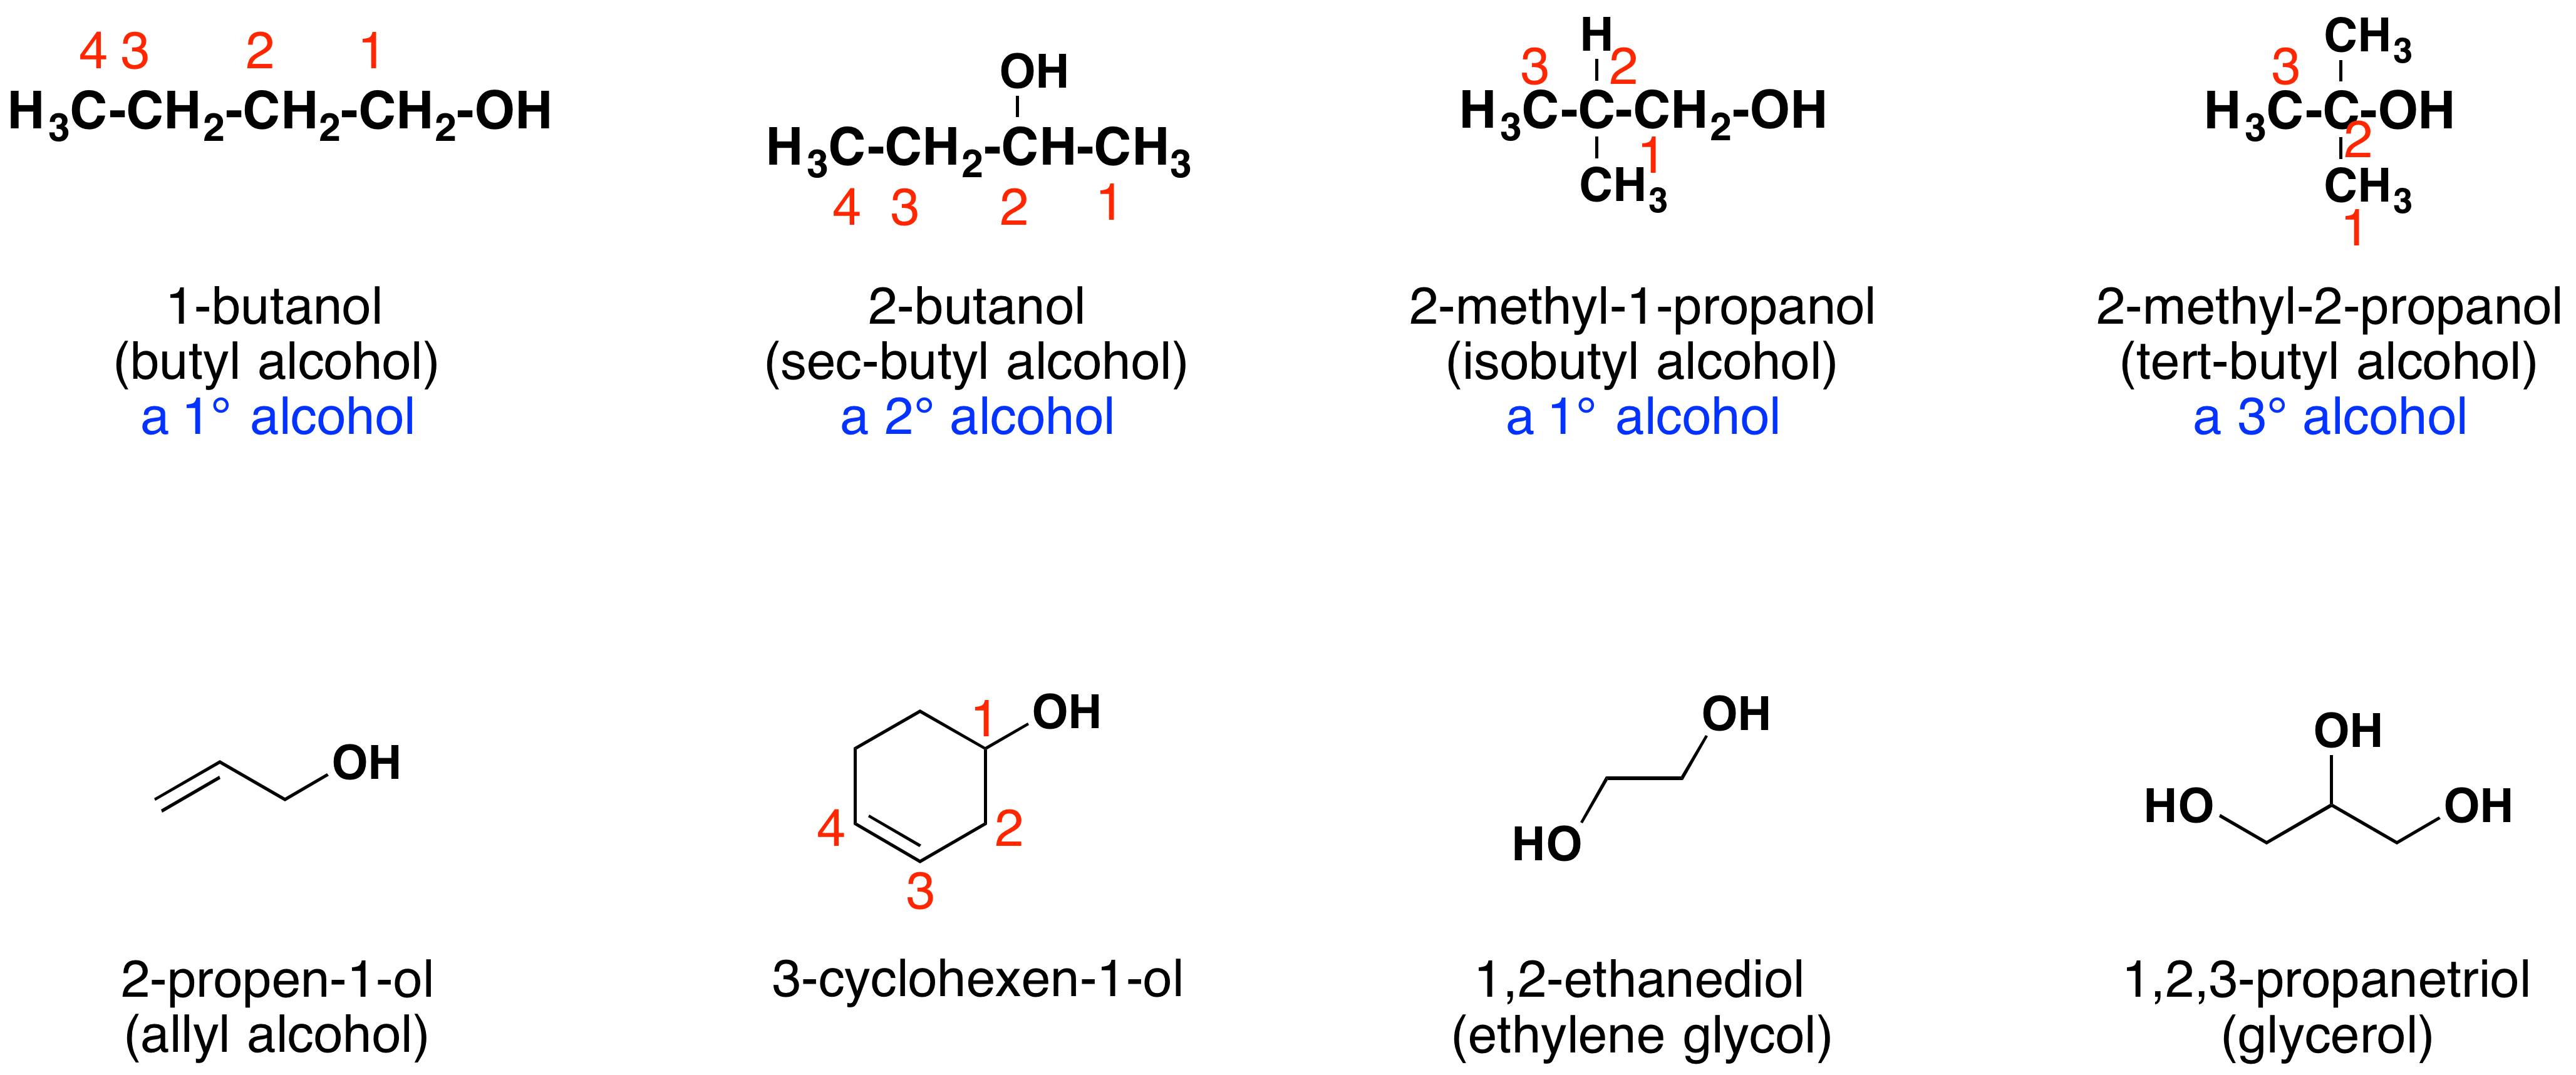 OrganicCore Alcohols1 ?revision=2&size=bestfit&width=750&height=342